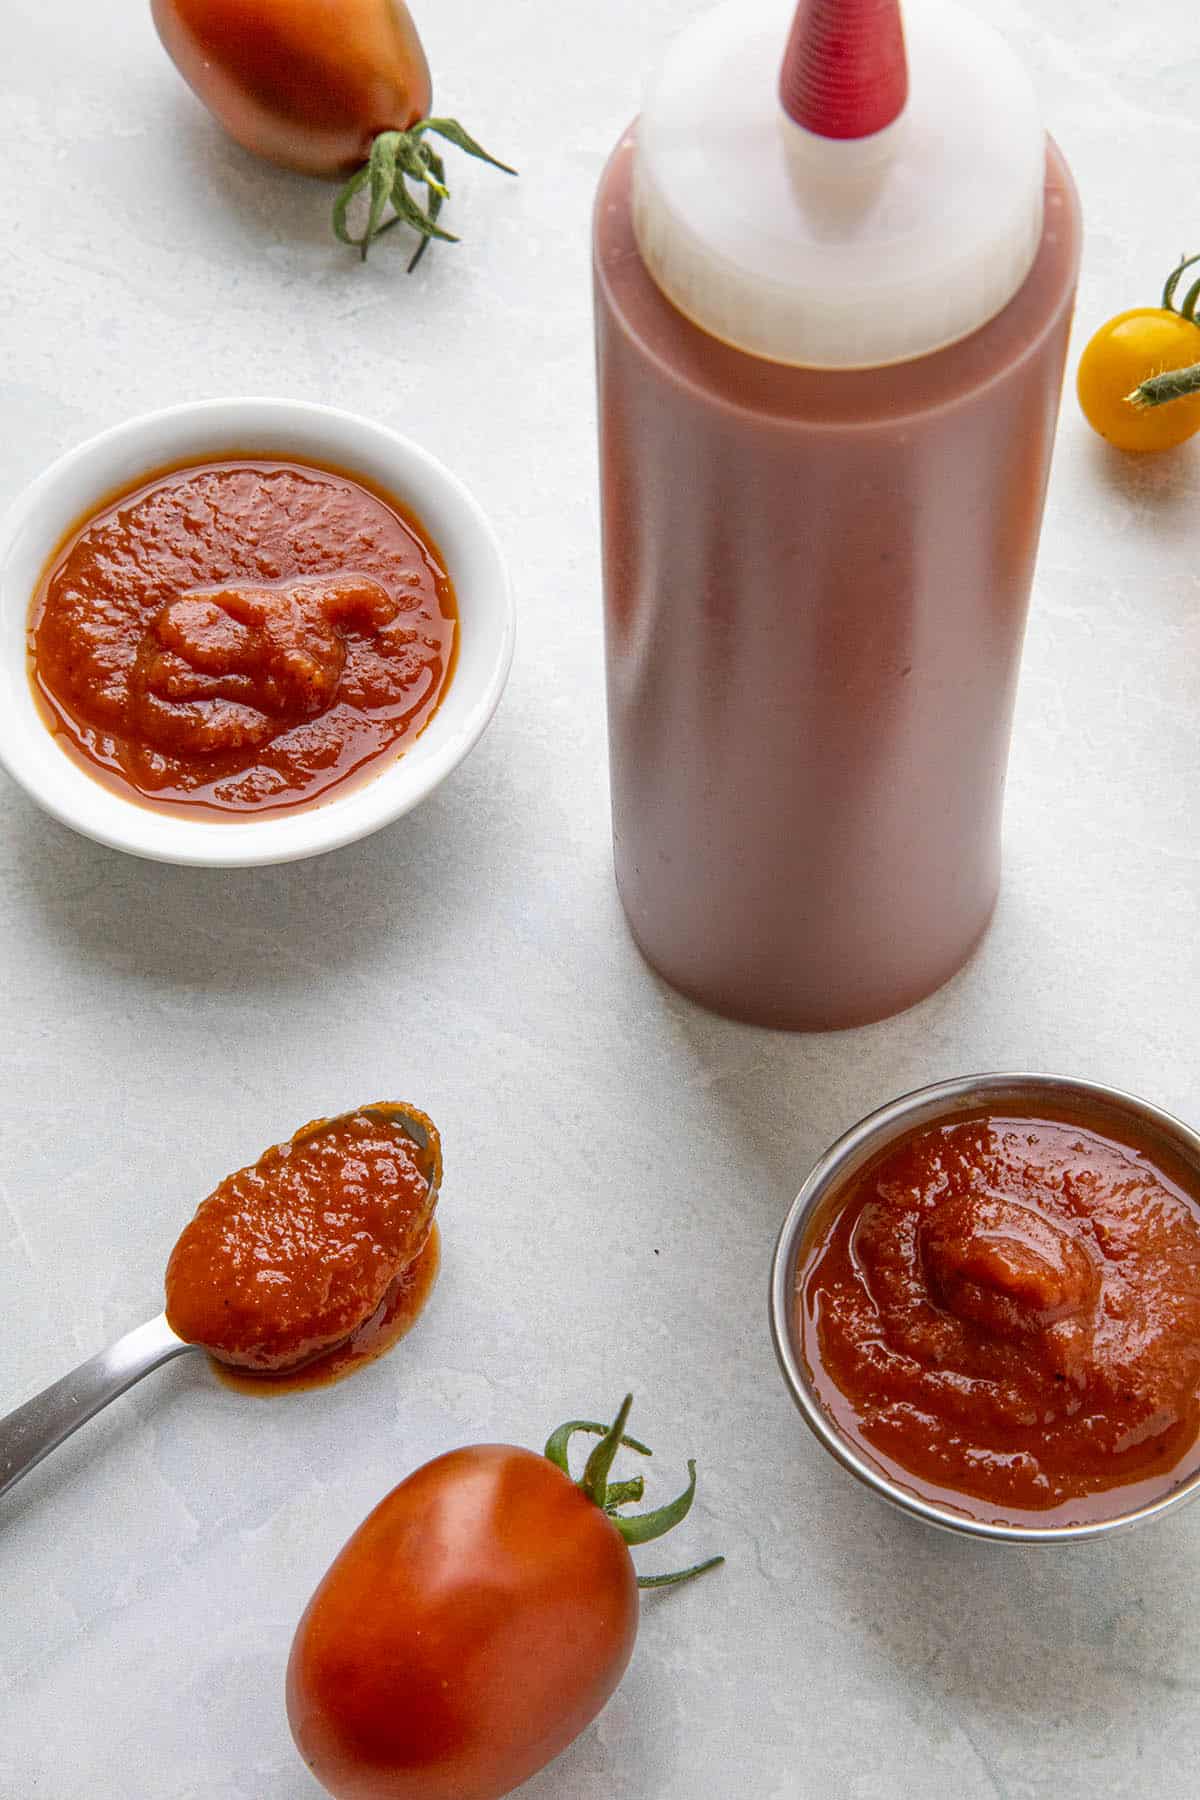 Homemade ketchup, ready to serve